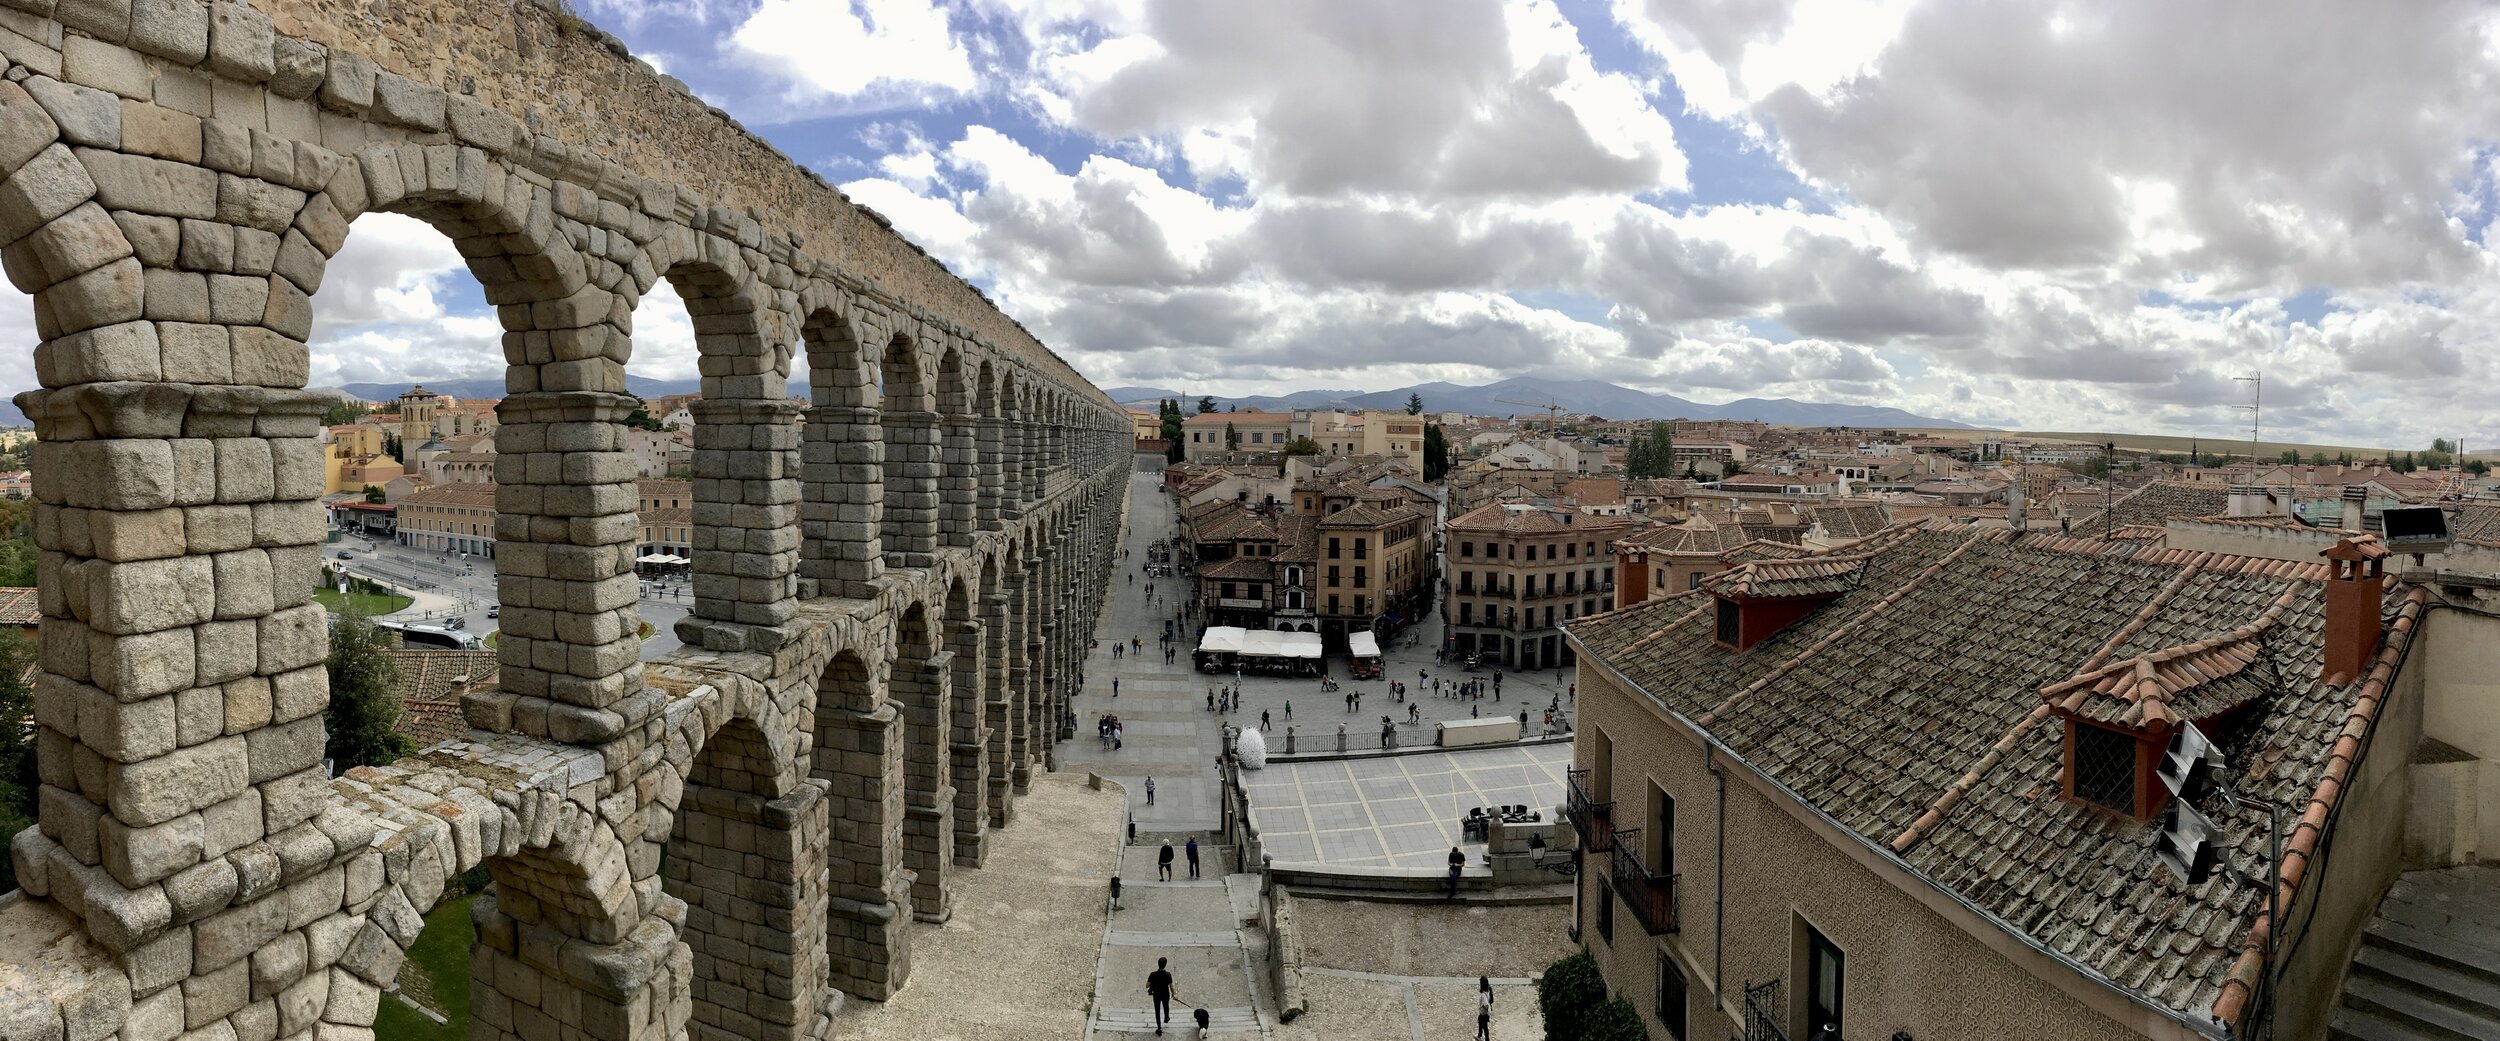  The city of Segovia is an easy day trip from Madrid - famous for its Roman aqueduct, cathedral, and castle, which served as one of the templates for Walt Disney's Cinderella Castle 